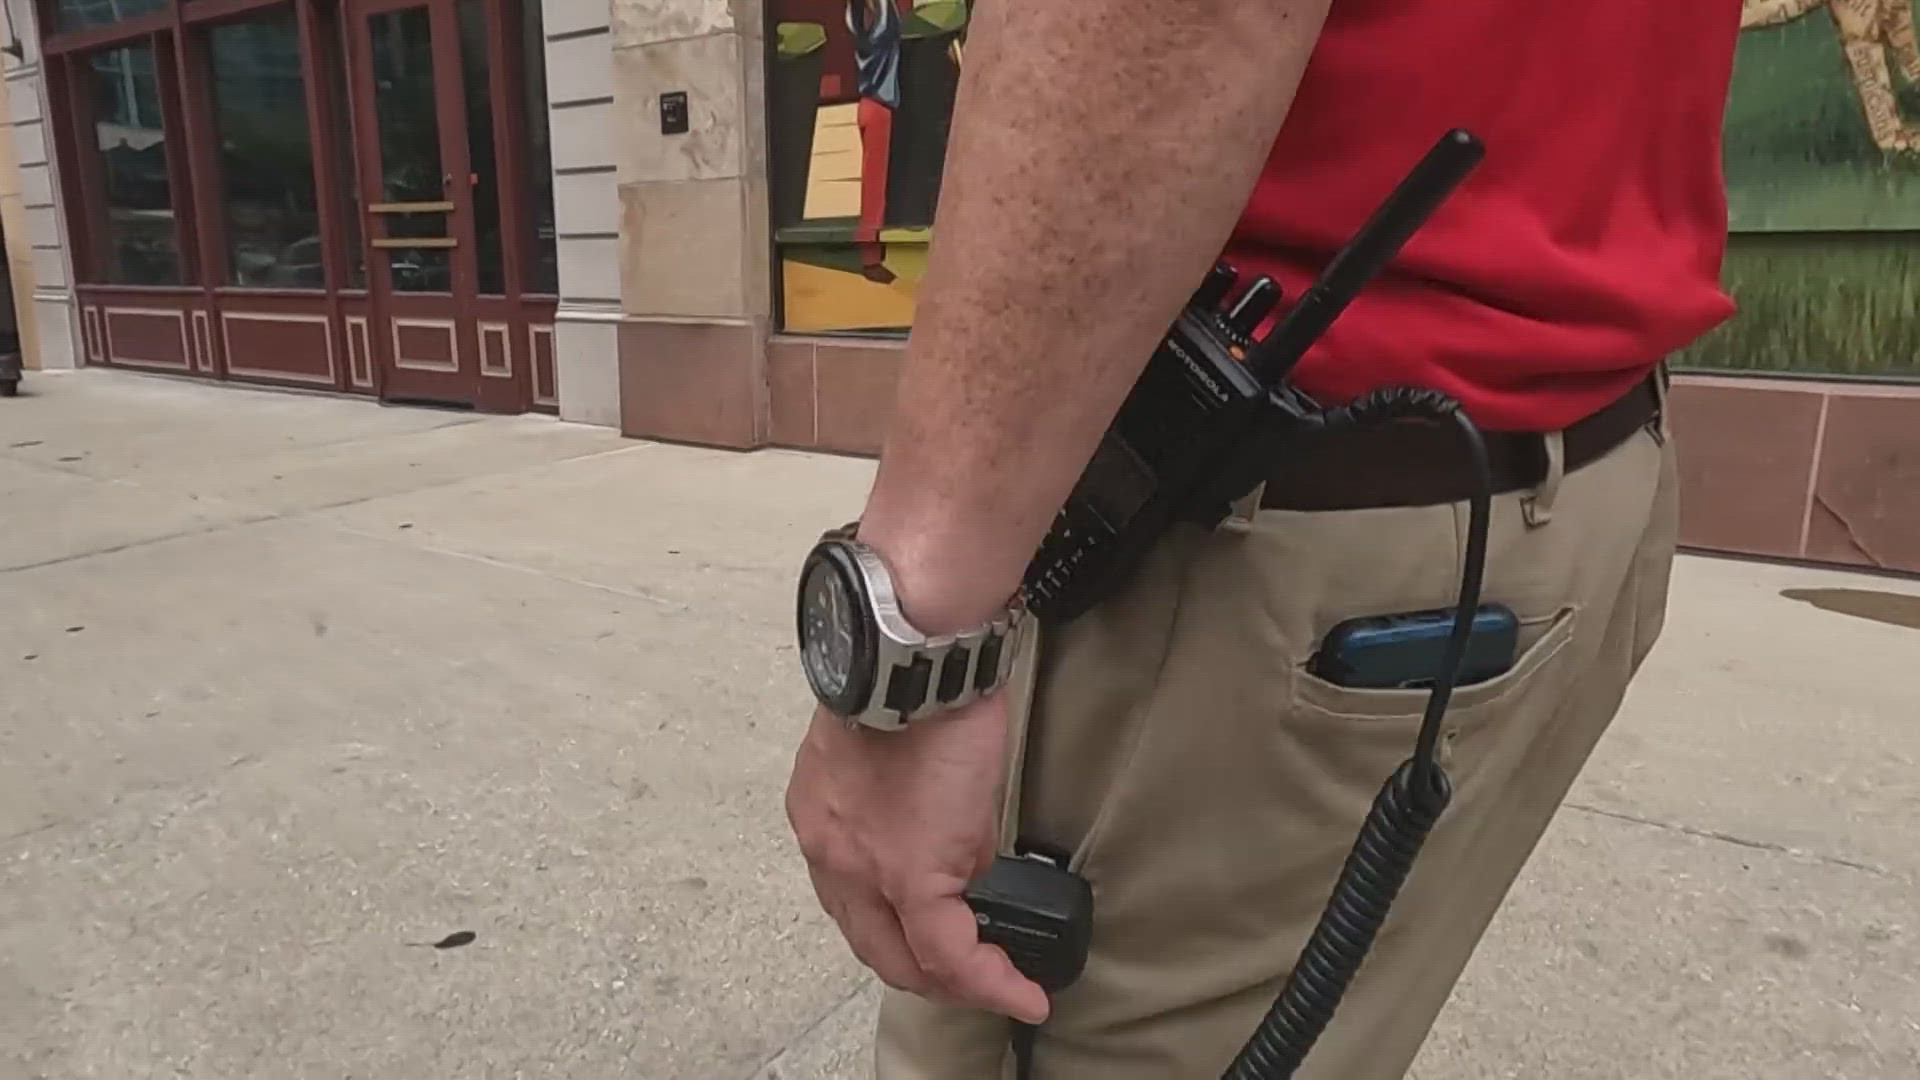 13News reporter Lauren Kostiuk details how Indianapolis Safety Ambassadors play a key role in downtown safety